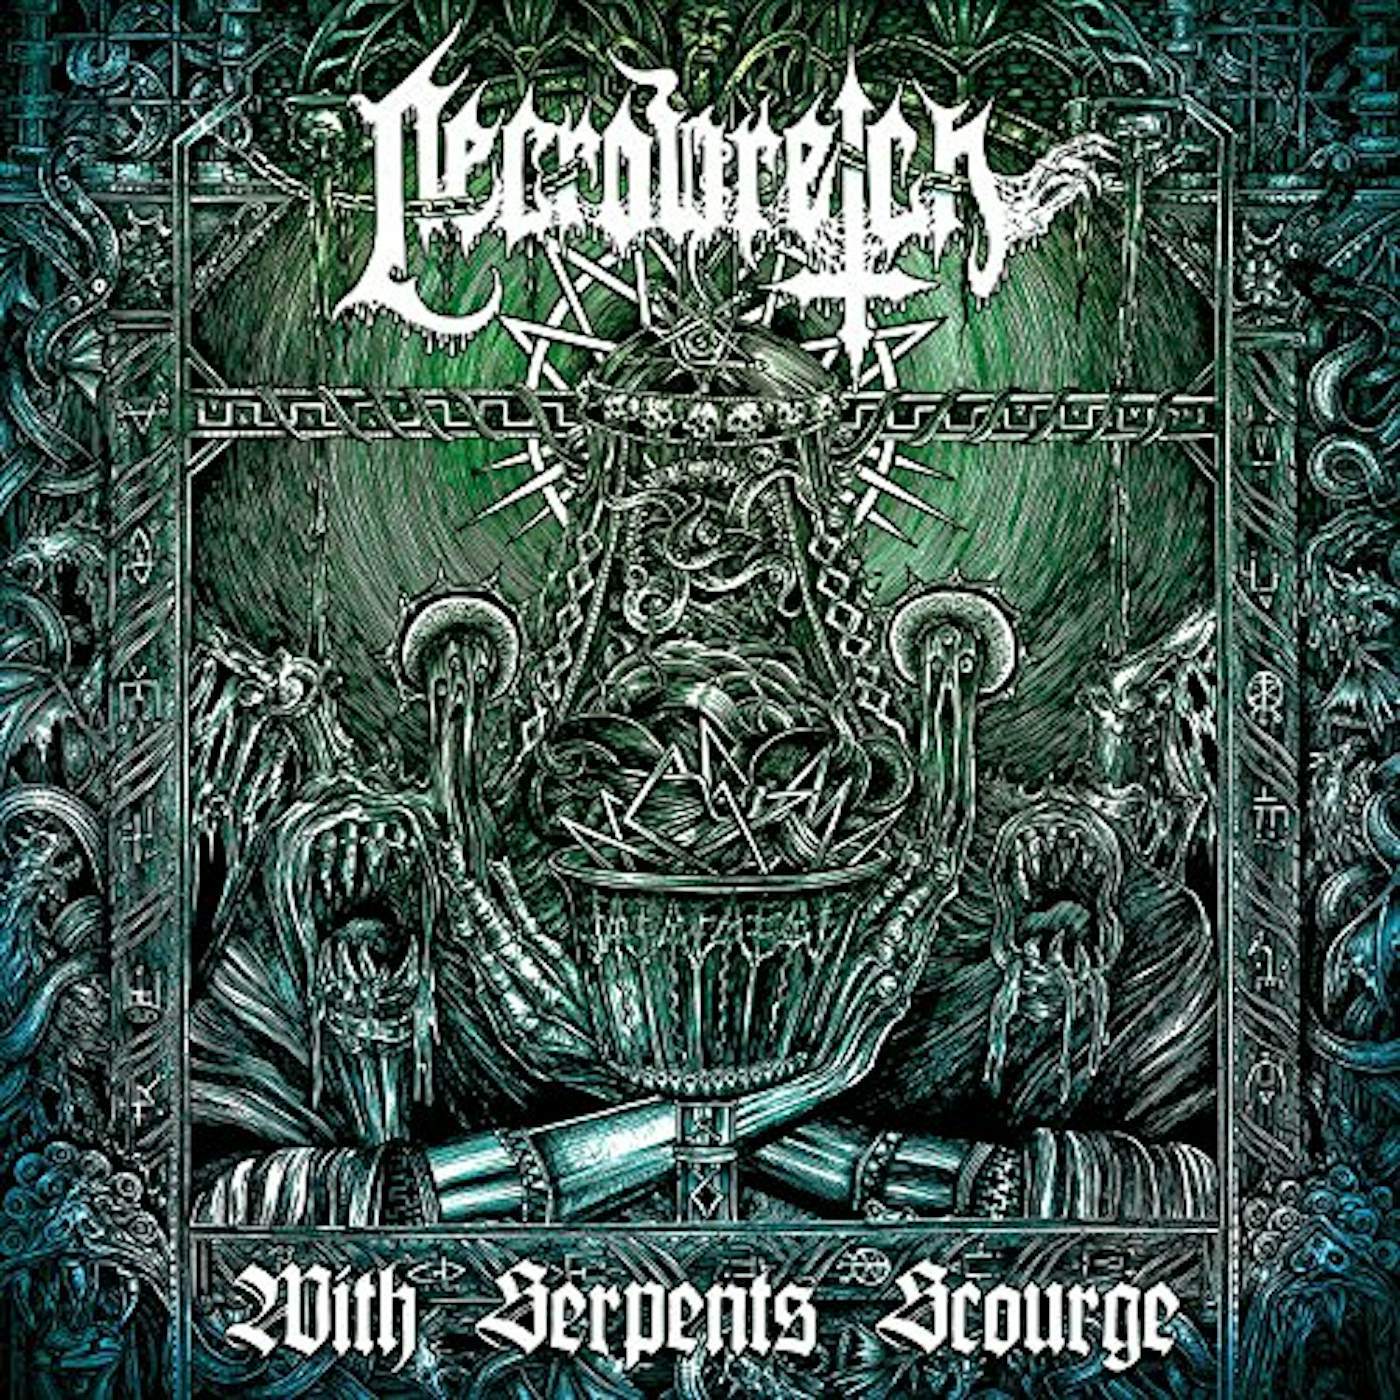 Necrowretch WITH SERPENTS SCOURGE CD